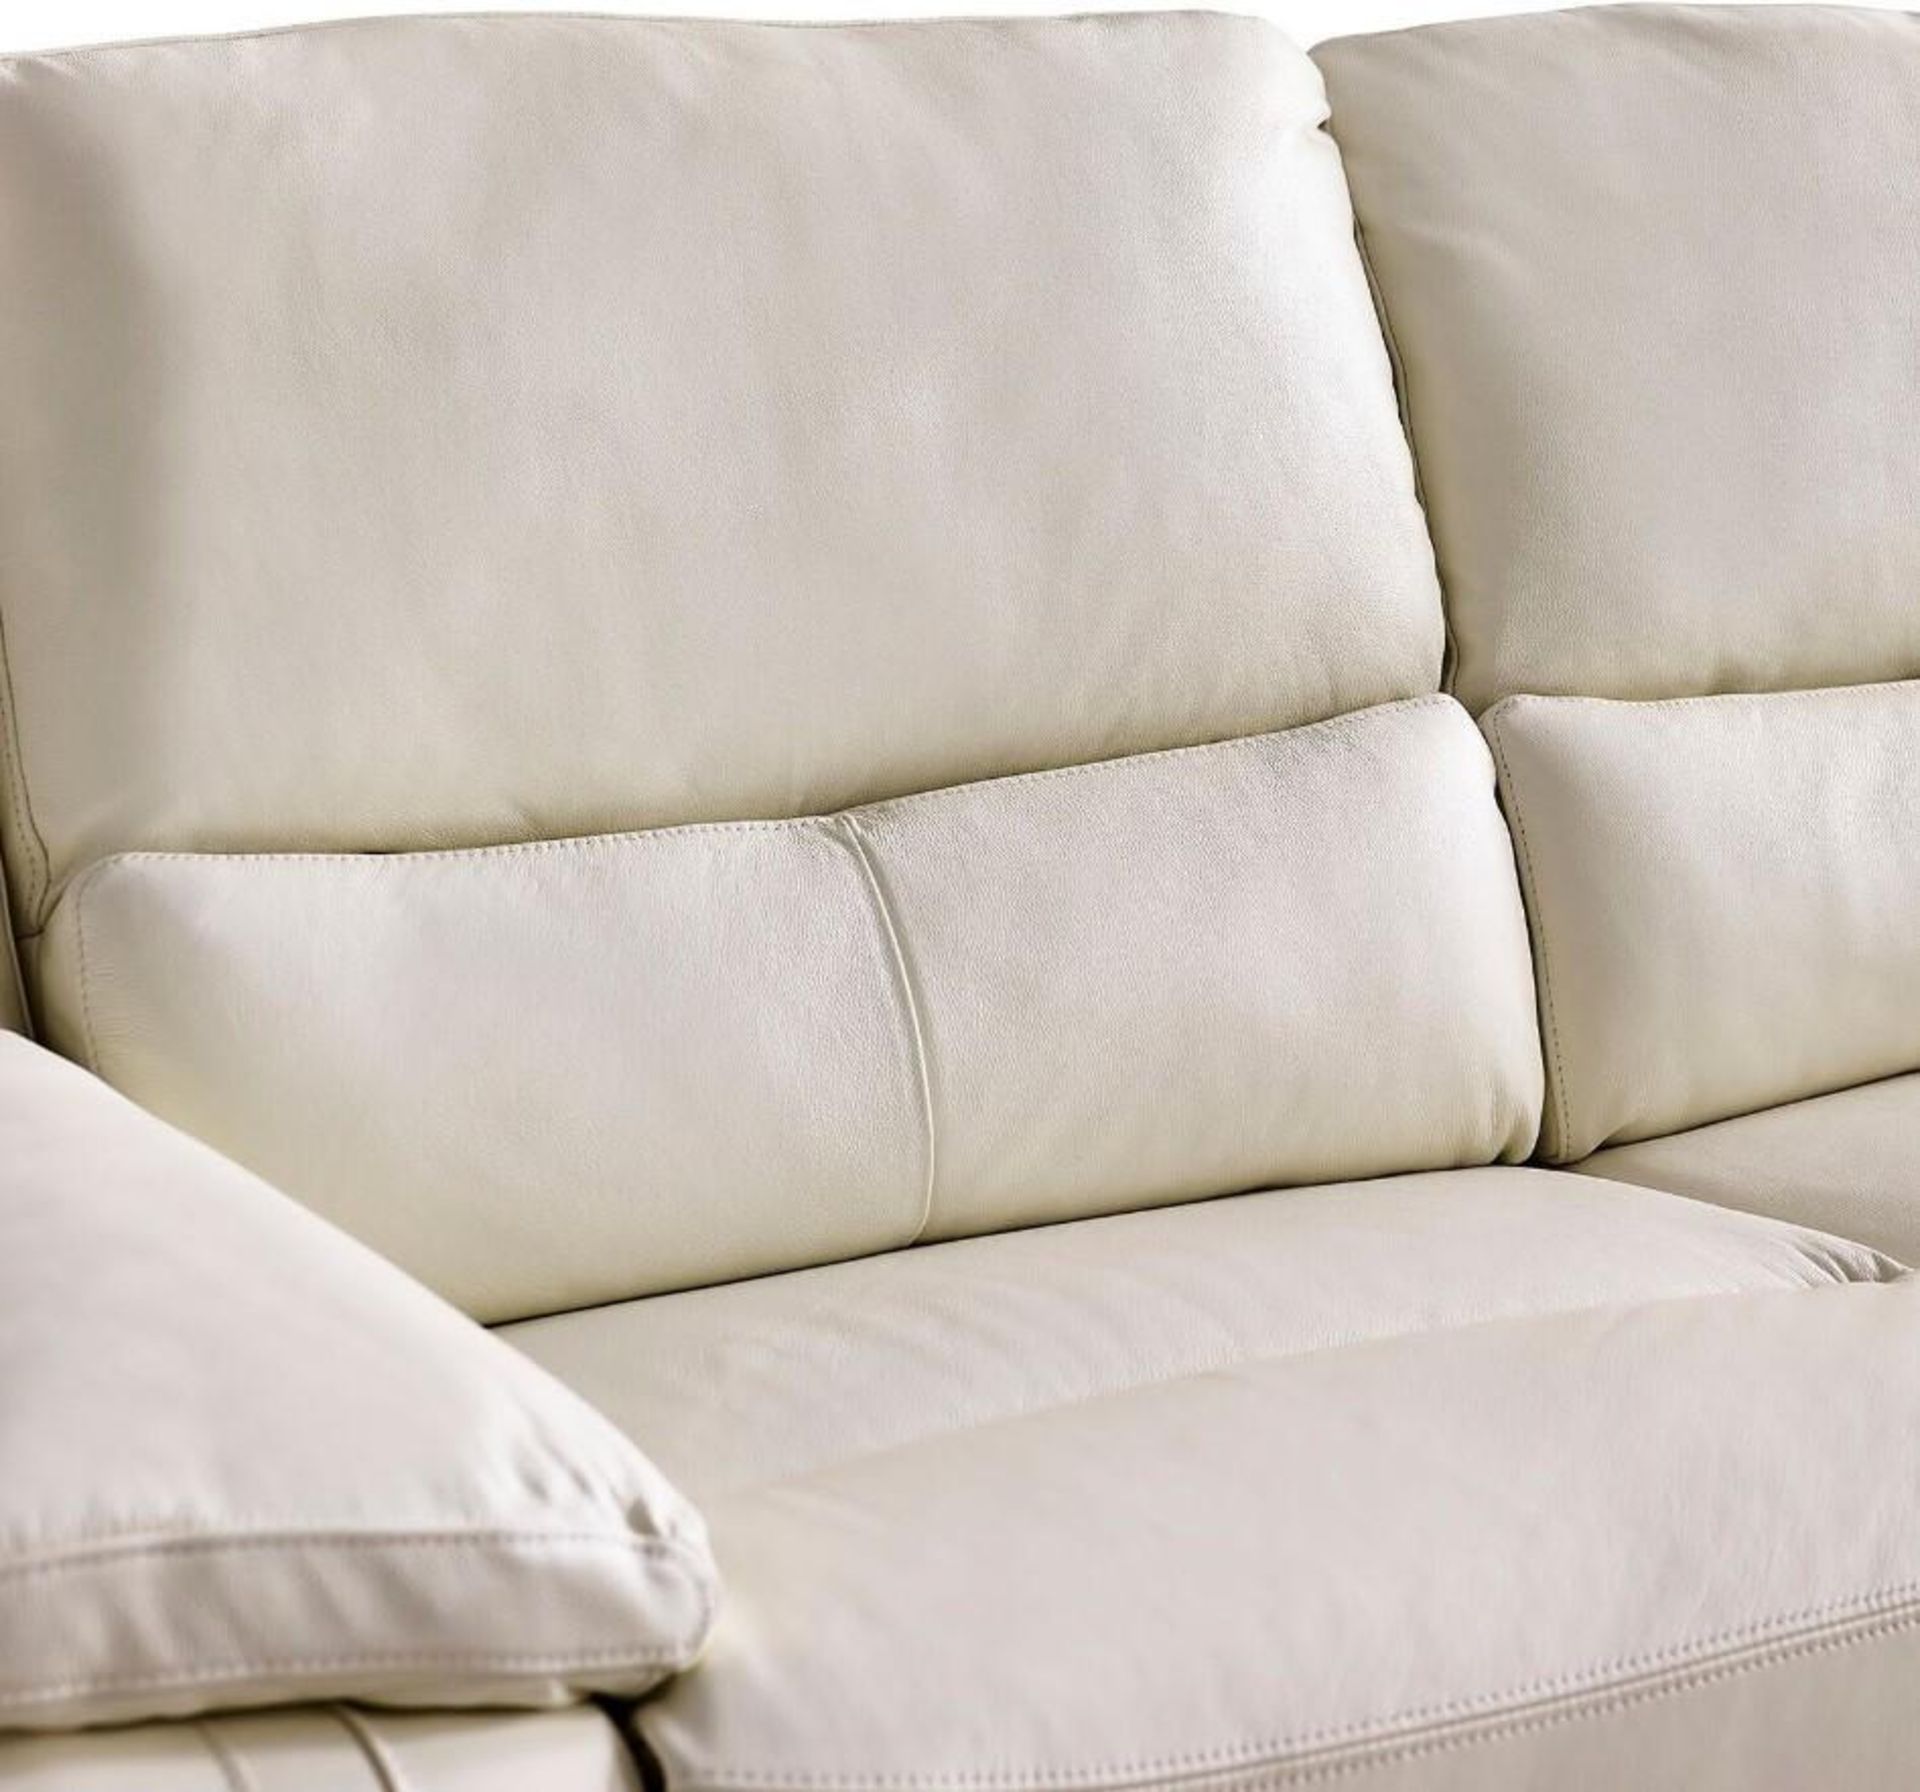 Brand new and boxed SCS Fallon 2 seater electric reclining sofa in Cream. - Image 5 of 7